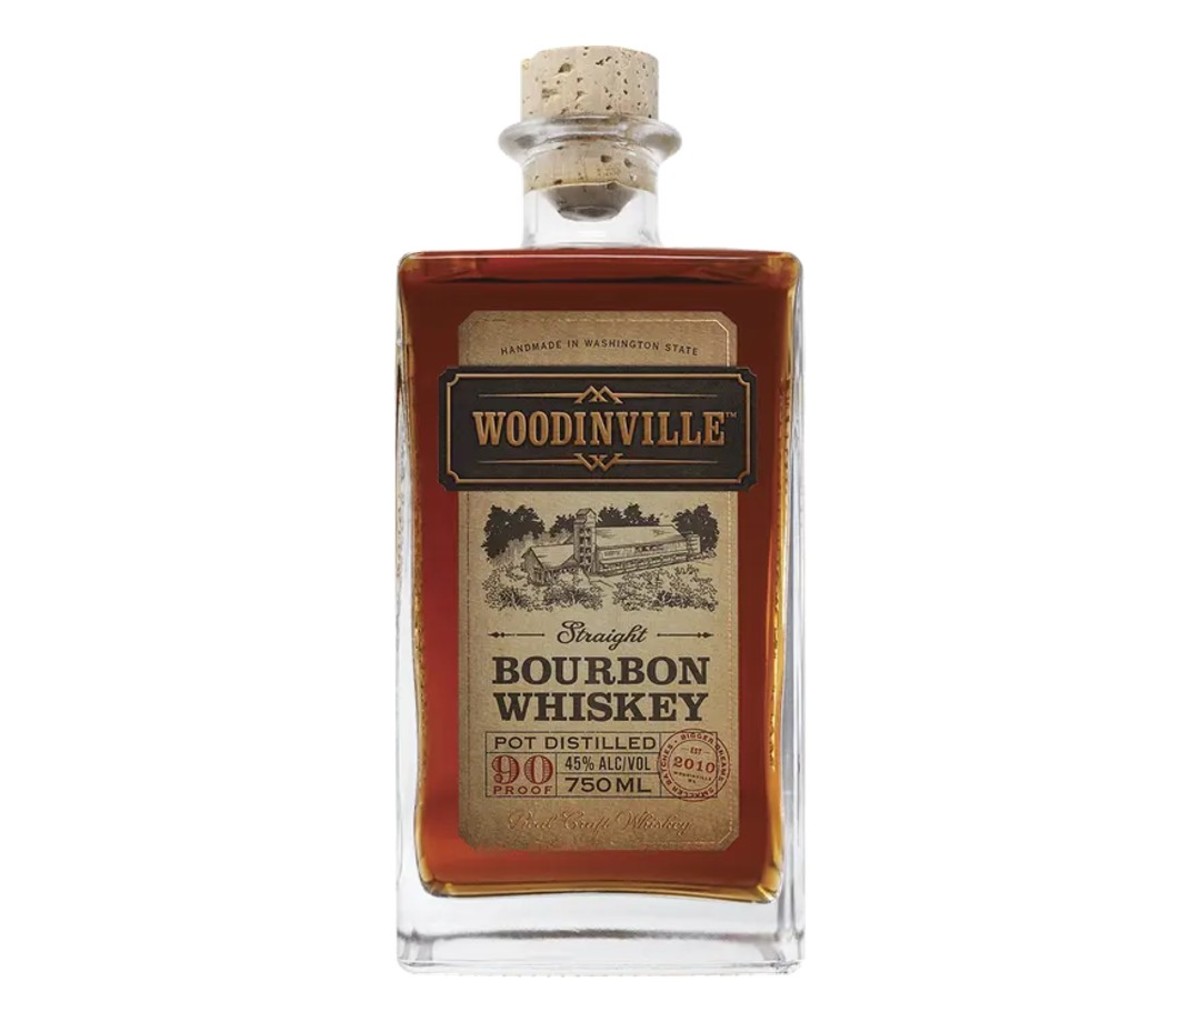 A bottle of Woodinville Straight Bourbon